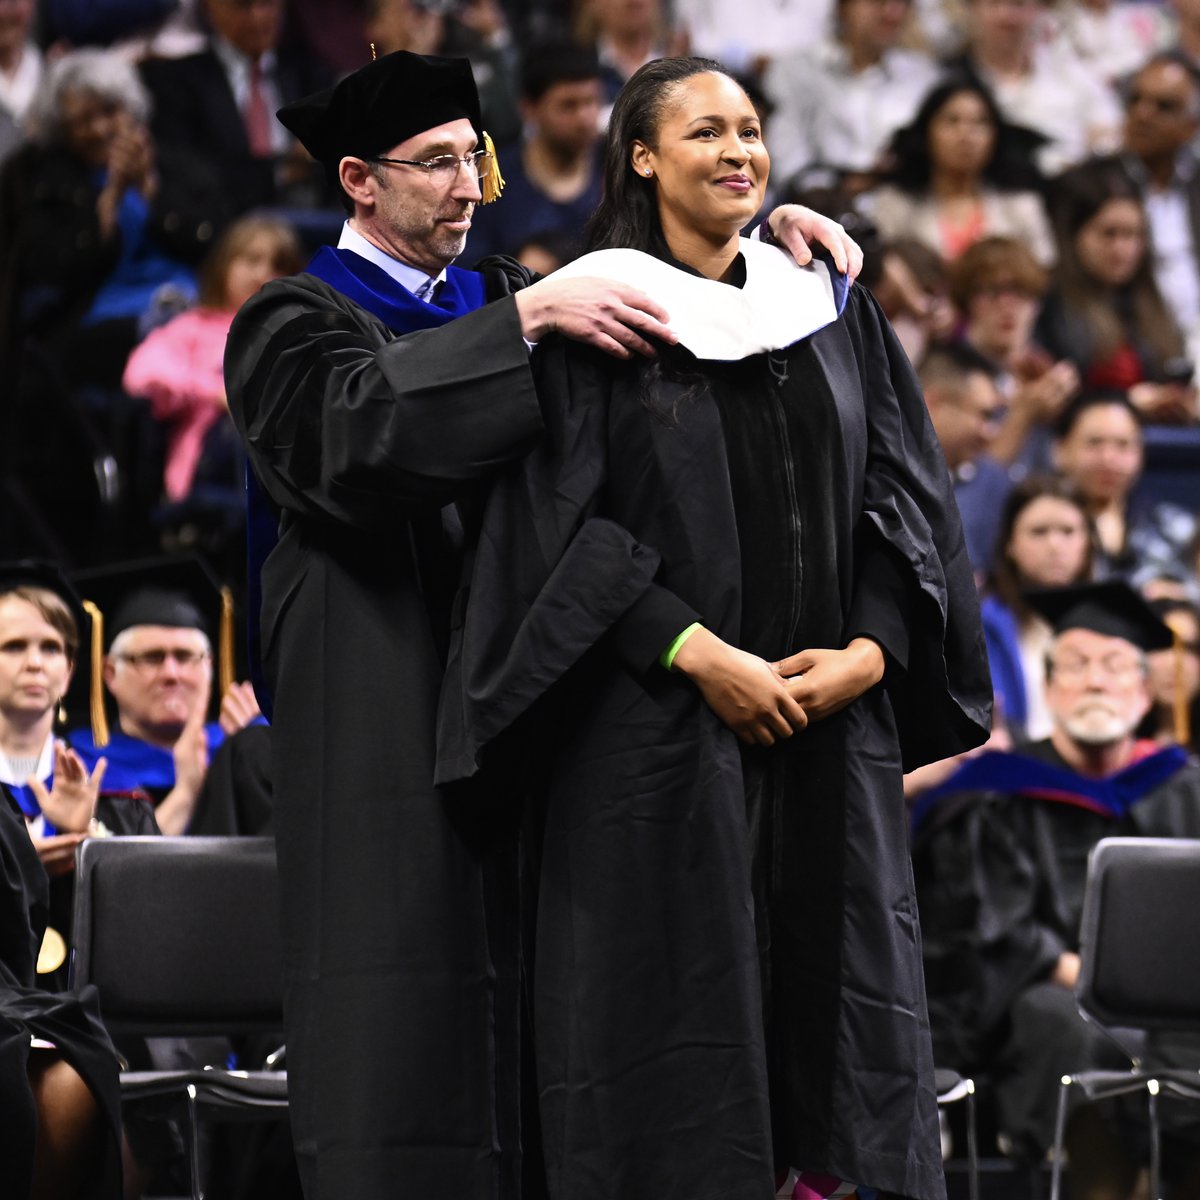 A legendary Husky back in Storrs 💙 Maya Moore Irons '11 returned to Gampel Pavilion this weekend as a commencement speaker for @UConnCLAS!